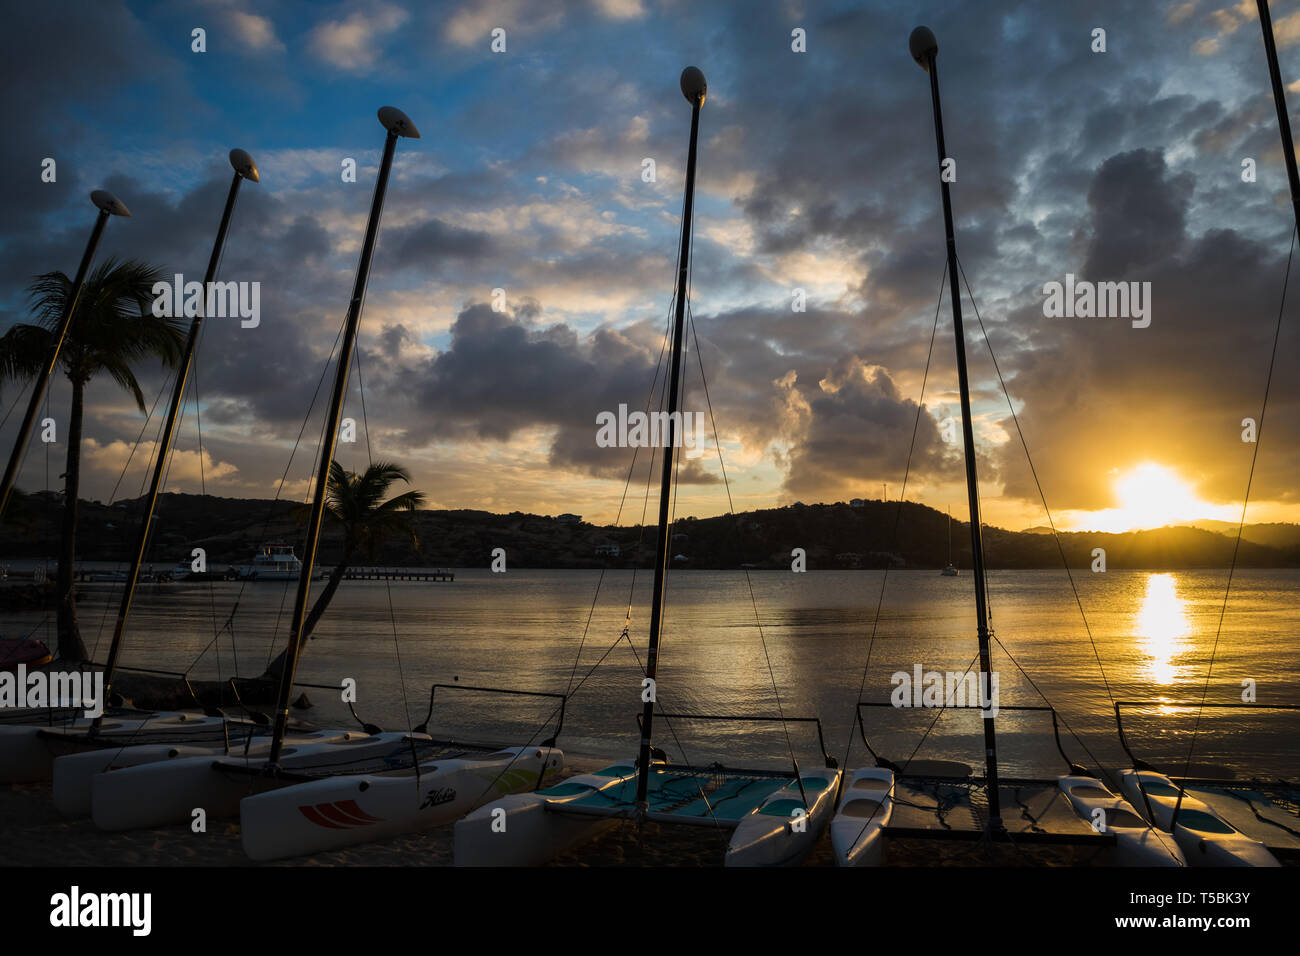 The sun sets behind a line of boats in Antigua Stock Photo